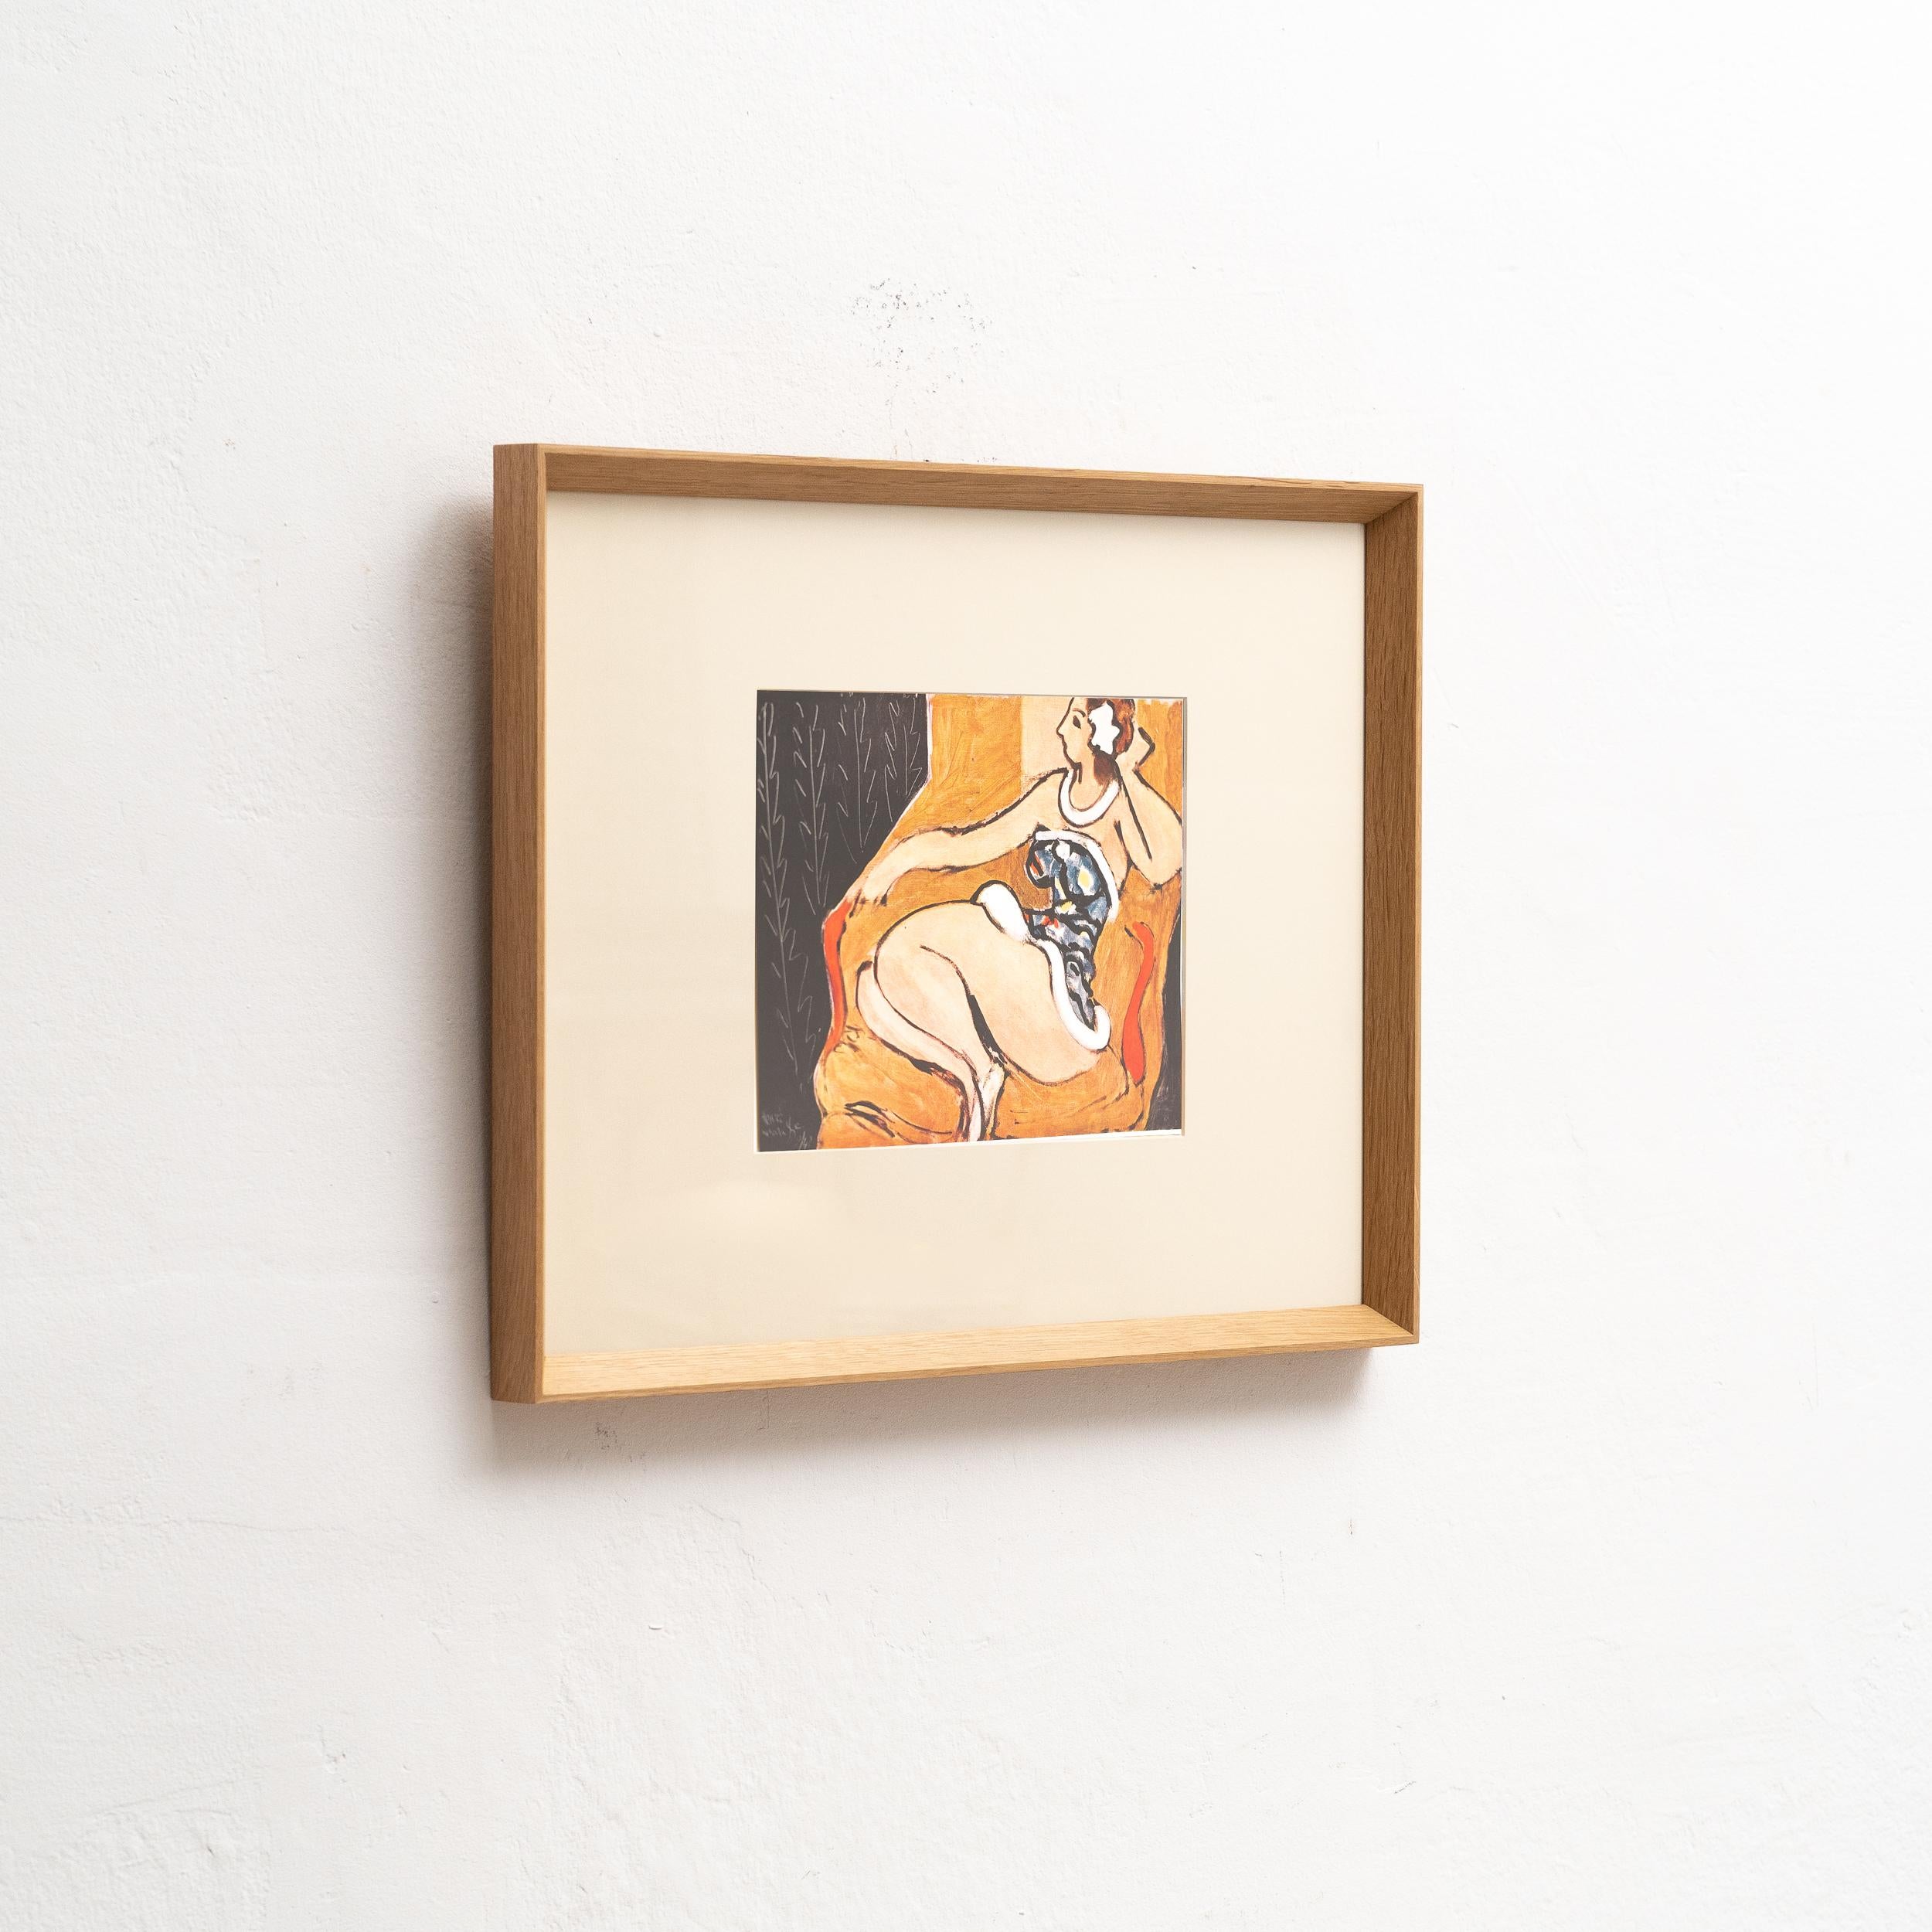 French Timeless Brilliance: Rare Henri Matisse Lithograph, Editions du Chene, 1943 For Sale